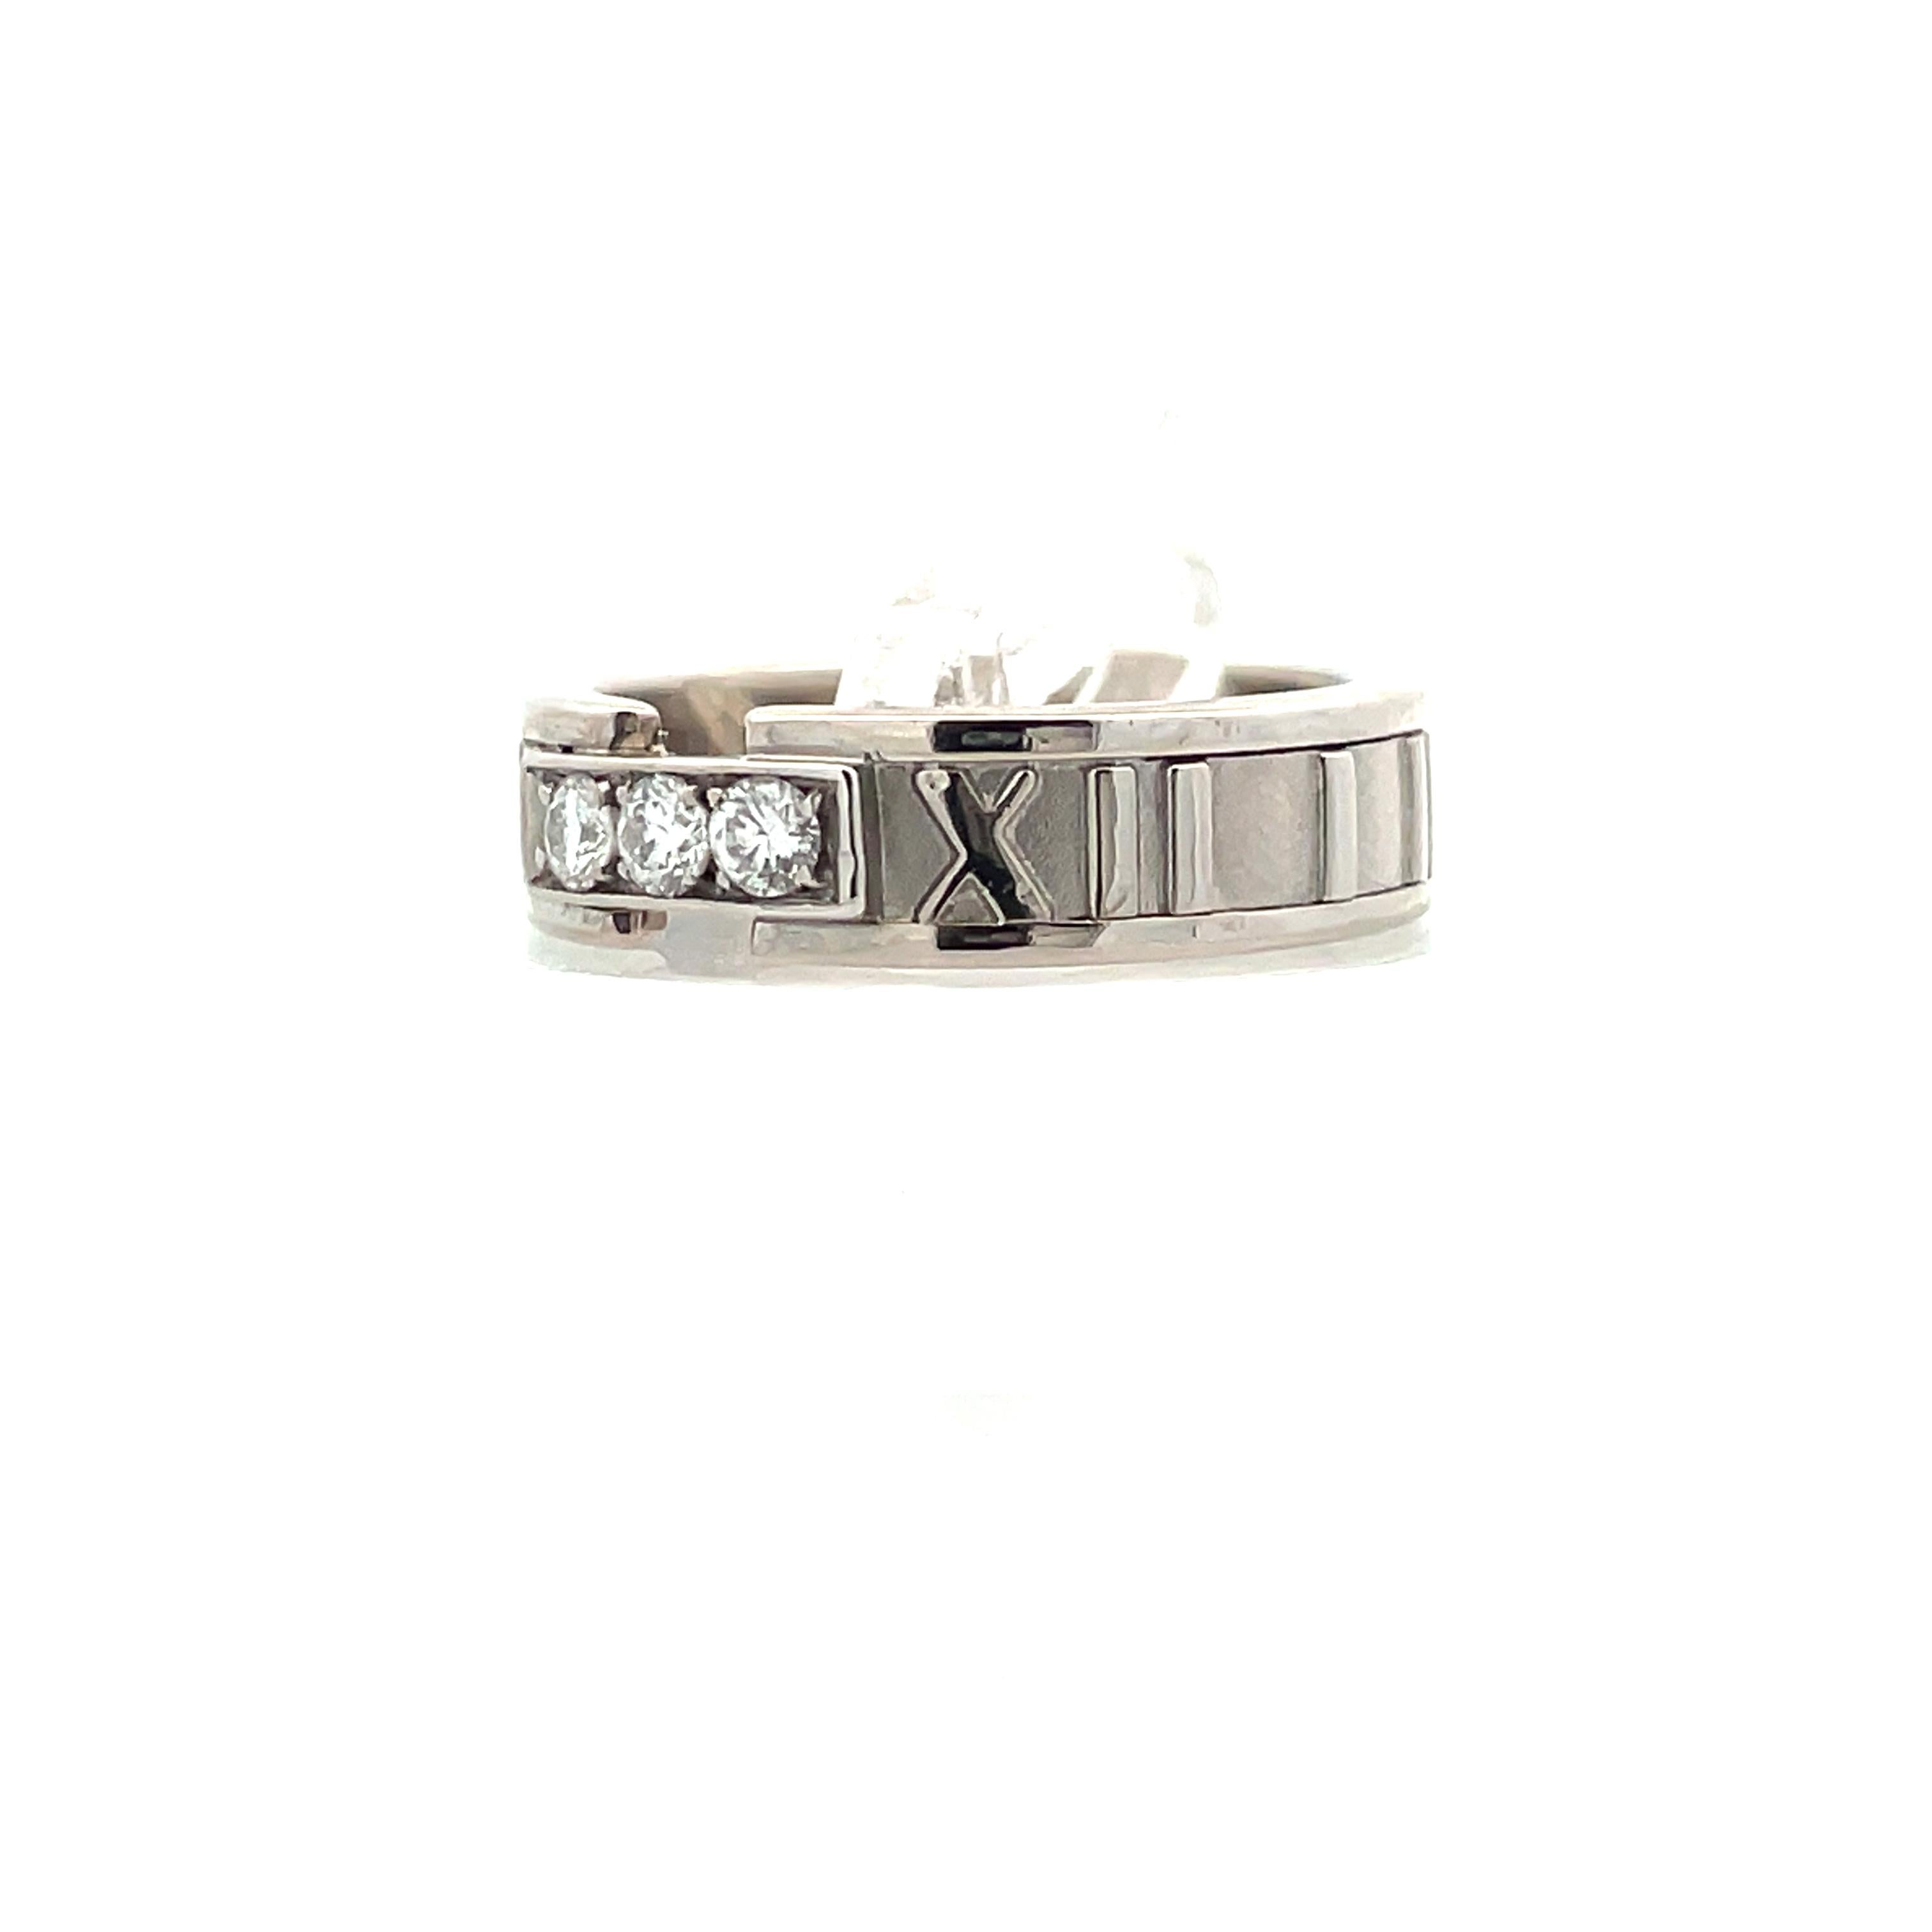 This white gold and diamond Tiffany & Co band with its Atlas design from 1995 is stunningly captivating. The Atlas collection features effortlessly confident pieces where sharply contemporary silhouettes meet timeless craftsmanship; an ode to